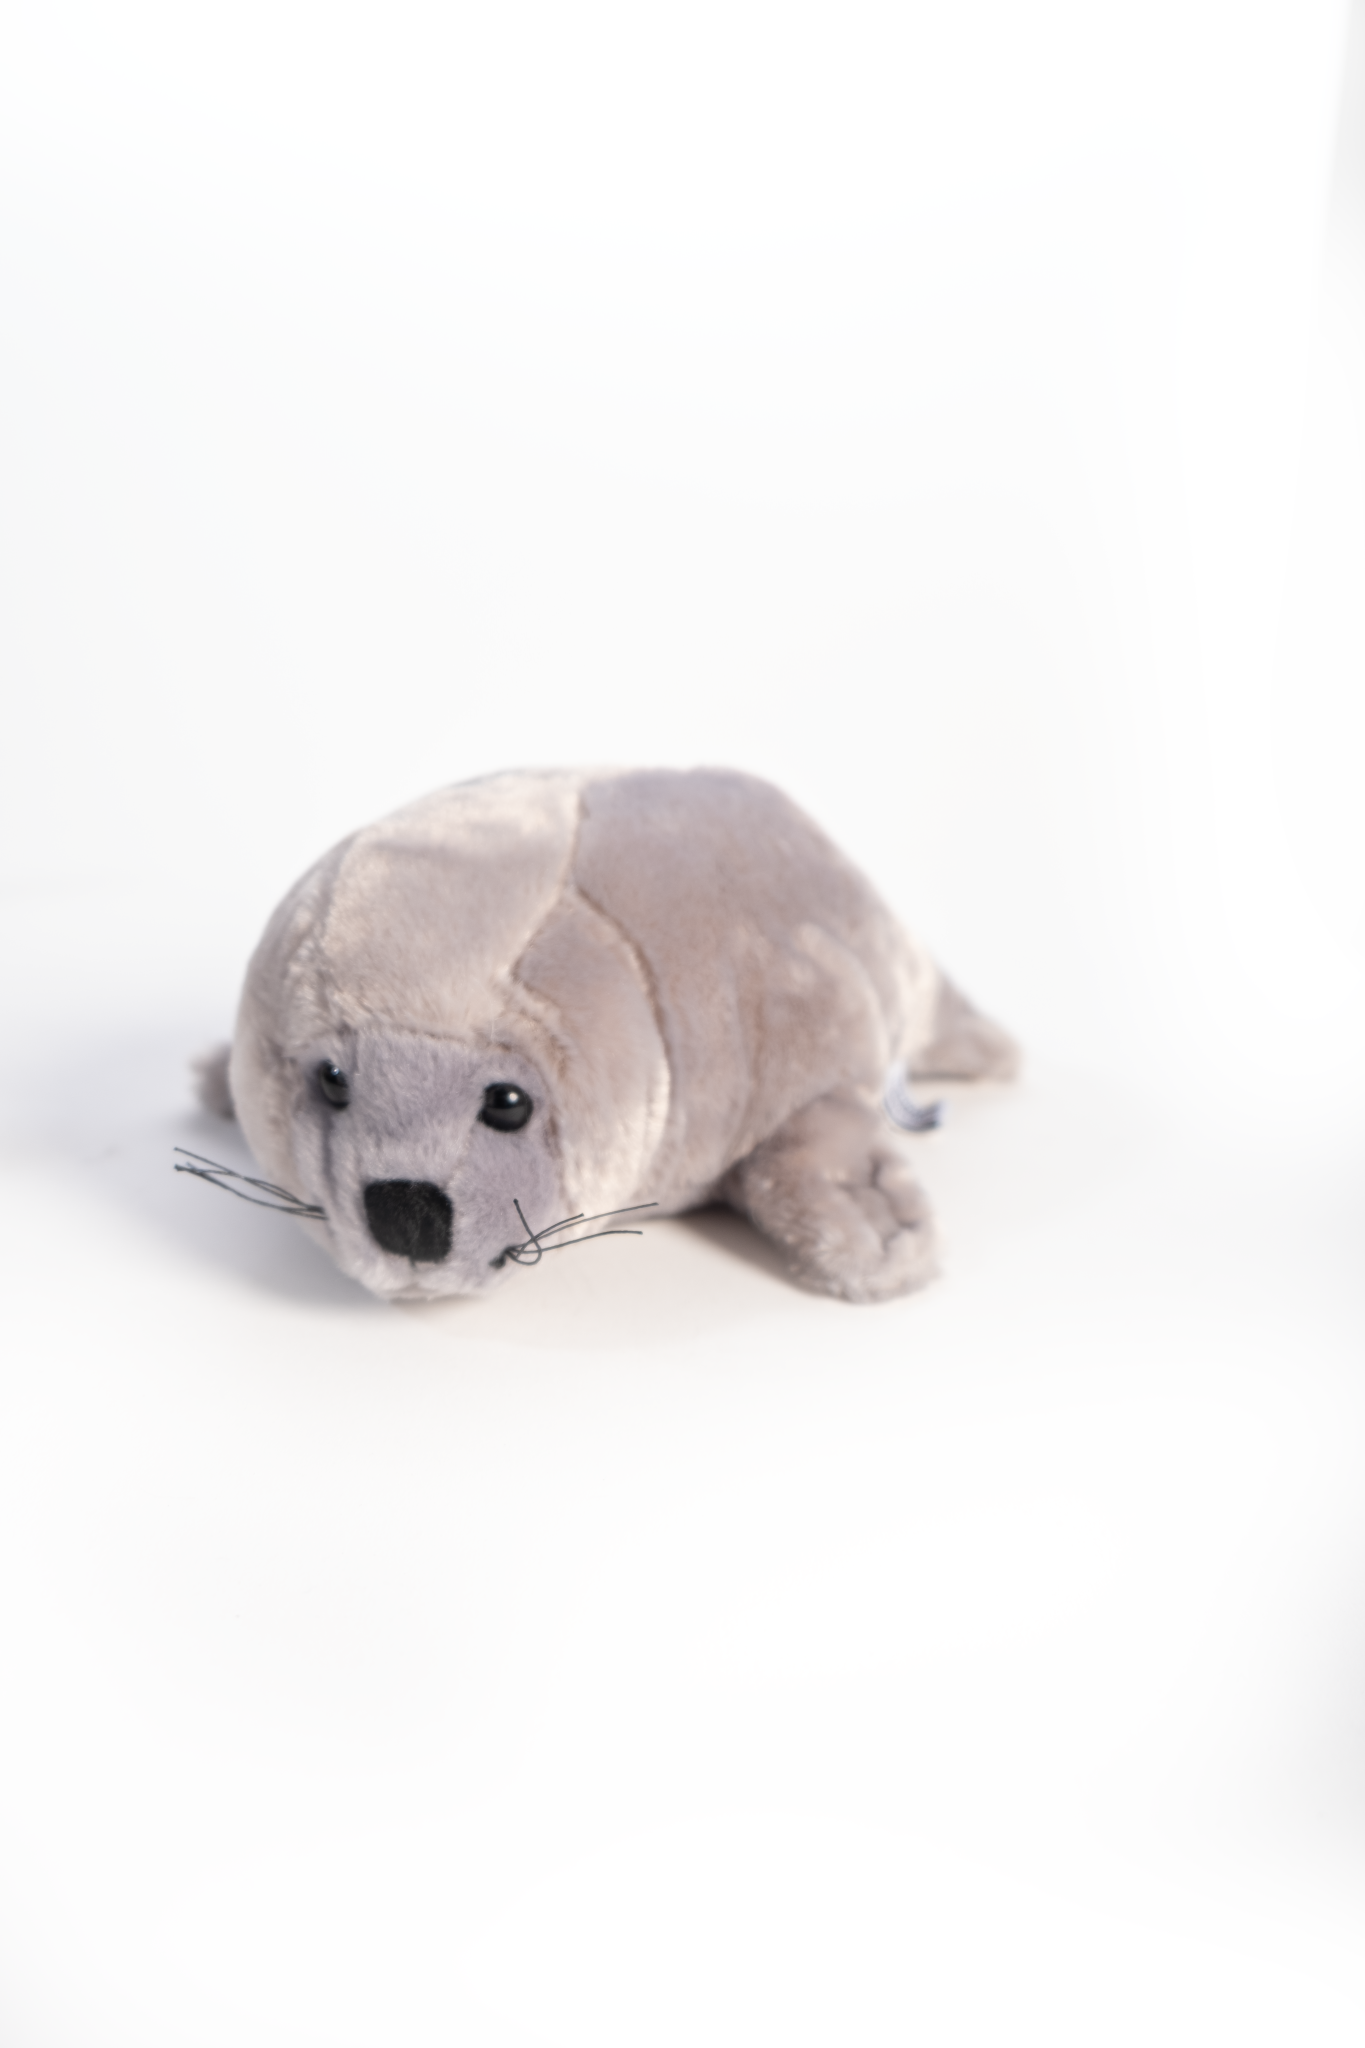 Seal Soft Toy